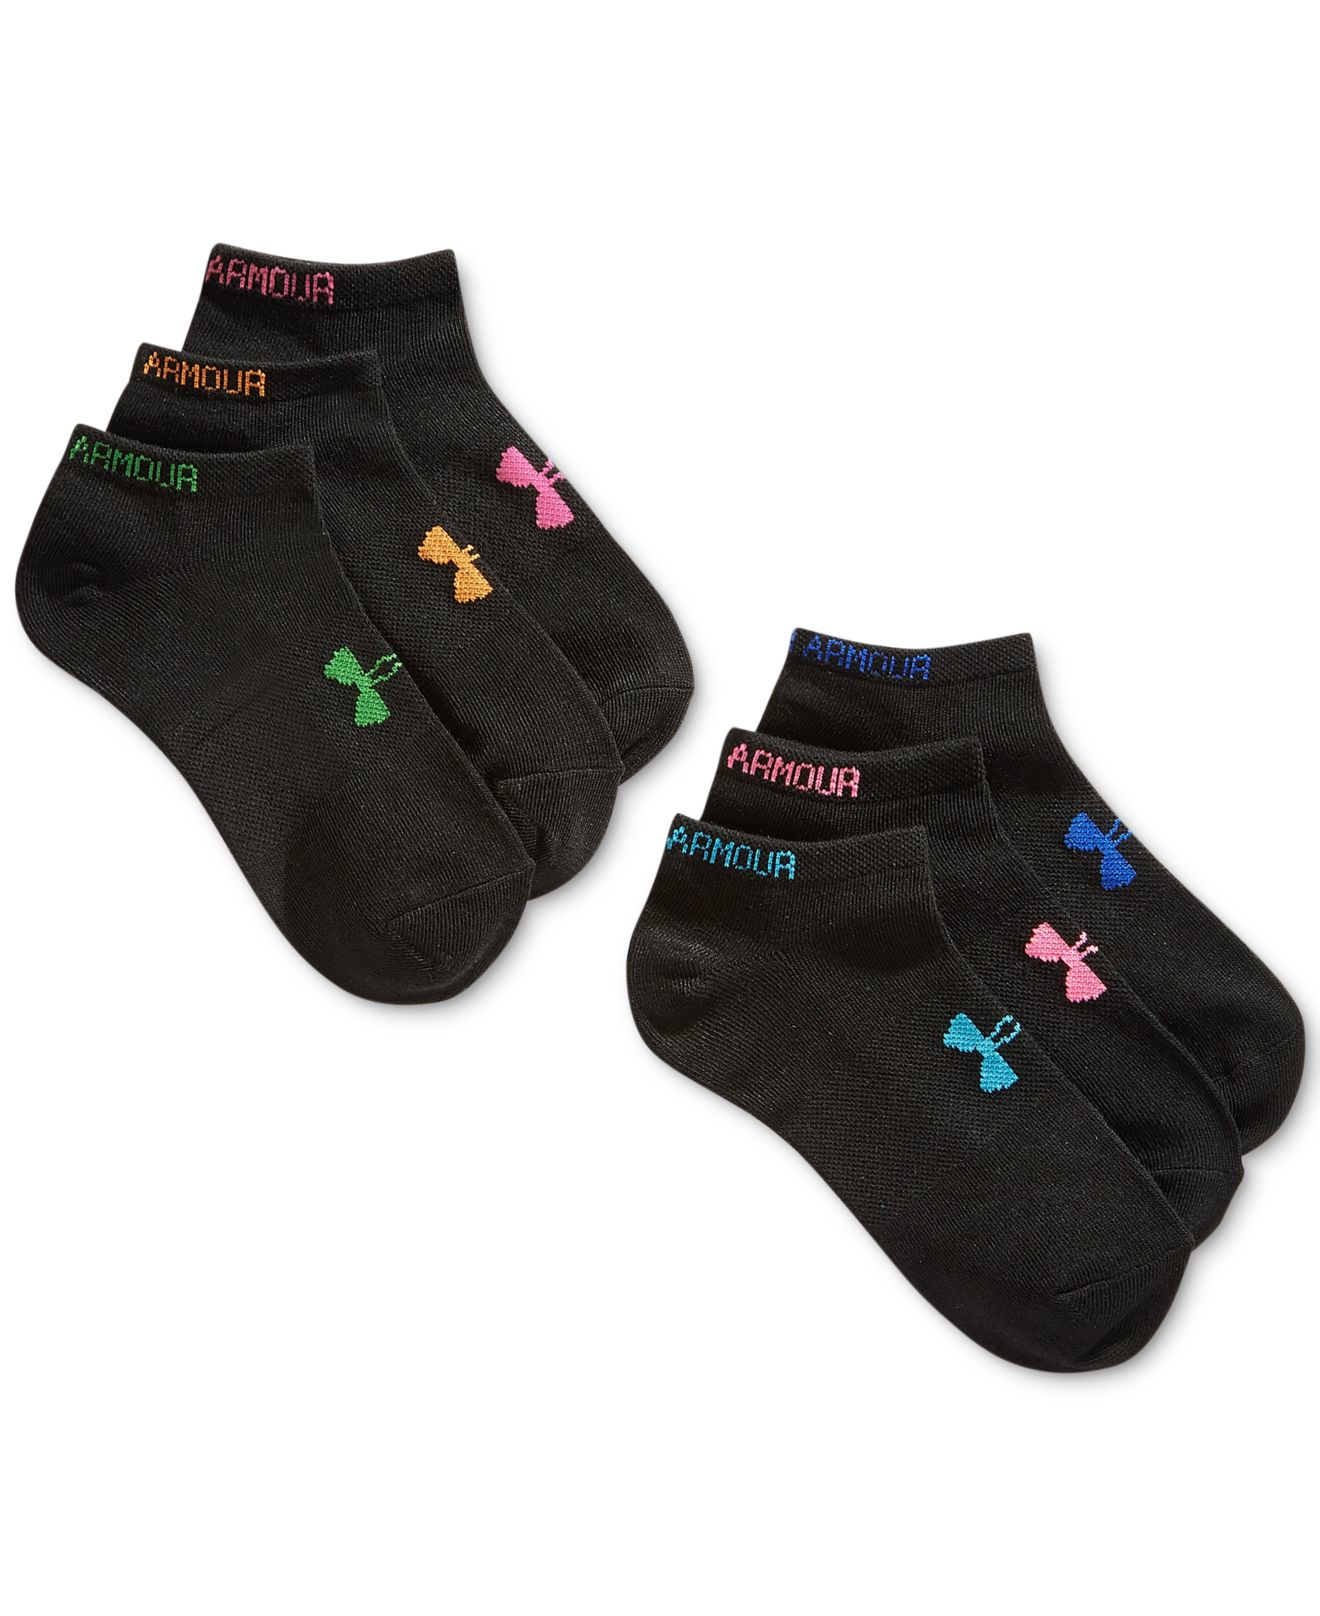 Under Armour Black Assortment Womens Liner No Show Socks 6 Pack Black Product 0 267627403 Normal 